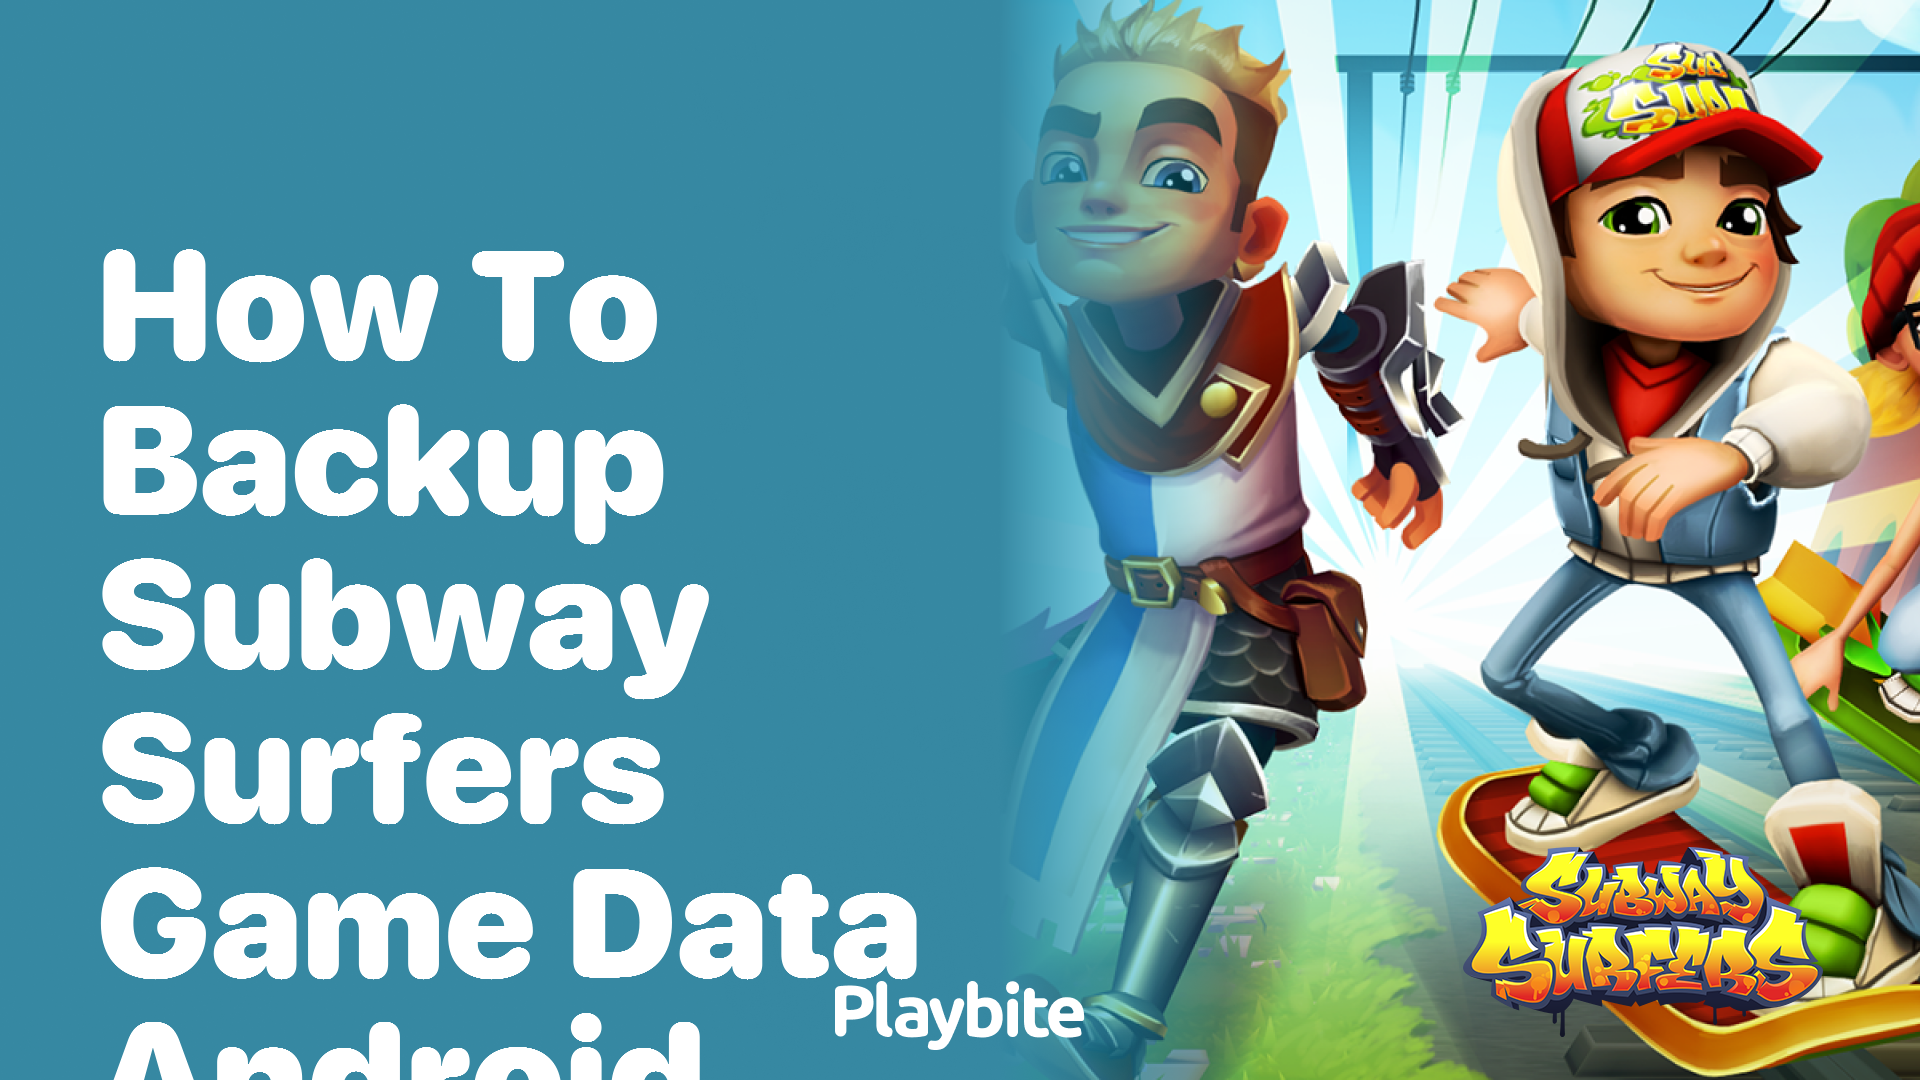 How to Backup Subway Surfers Game Data on Android